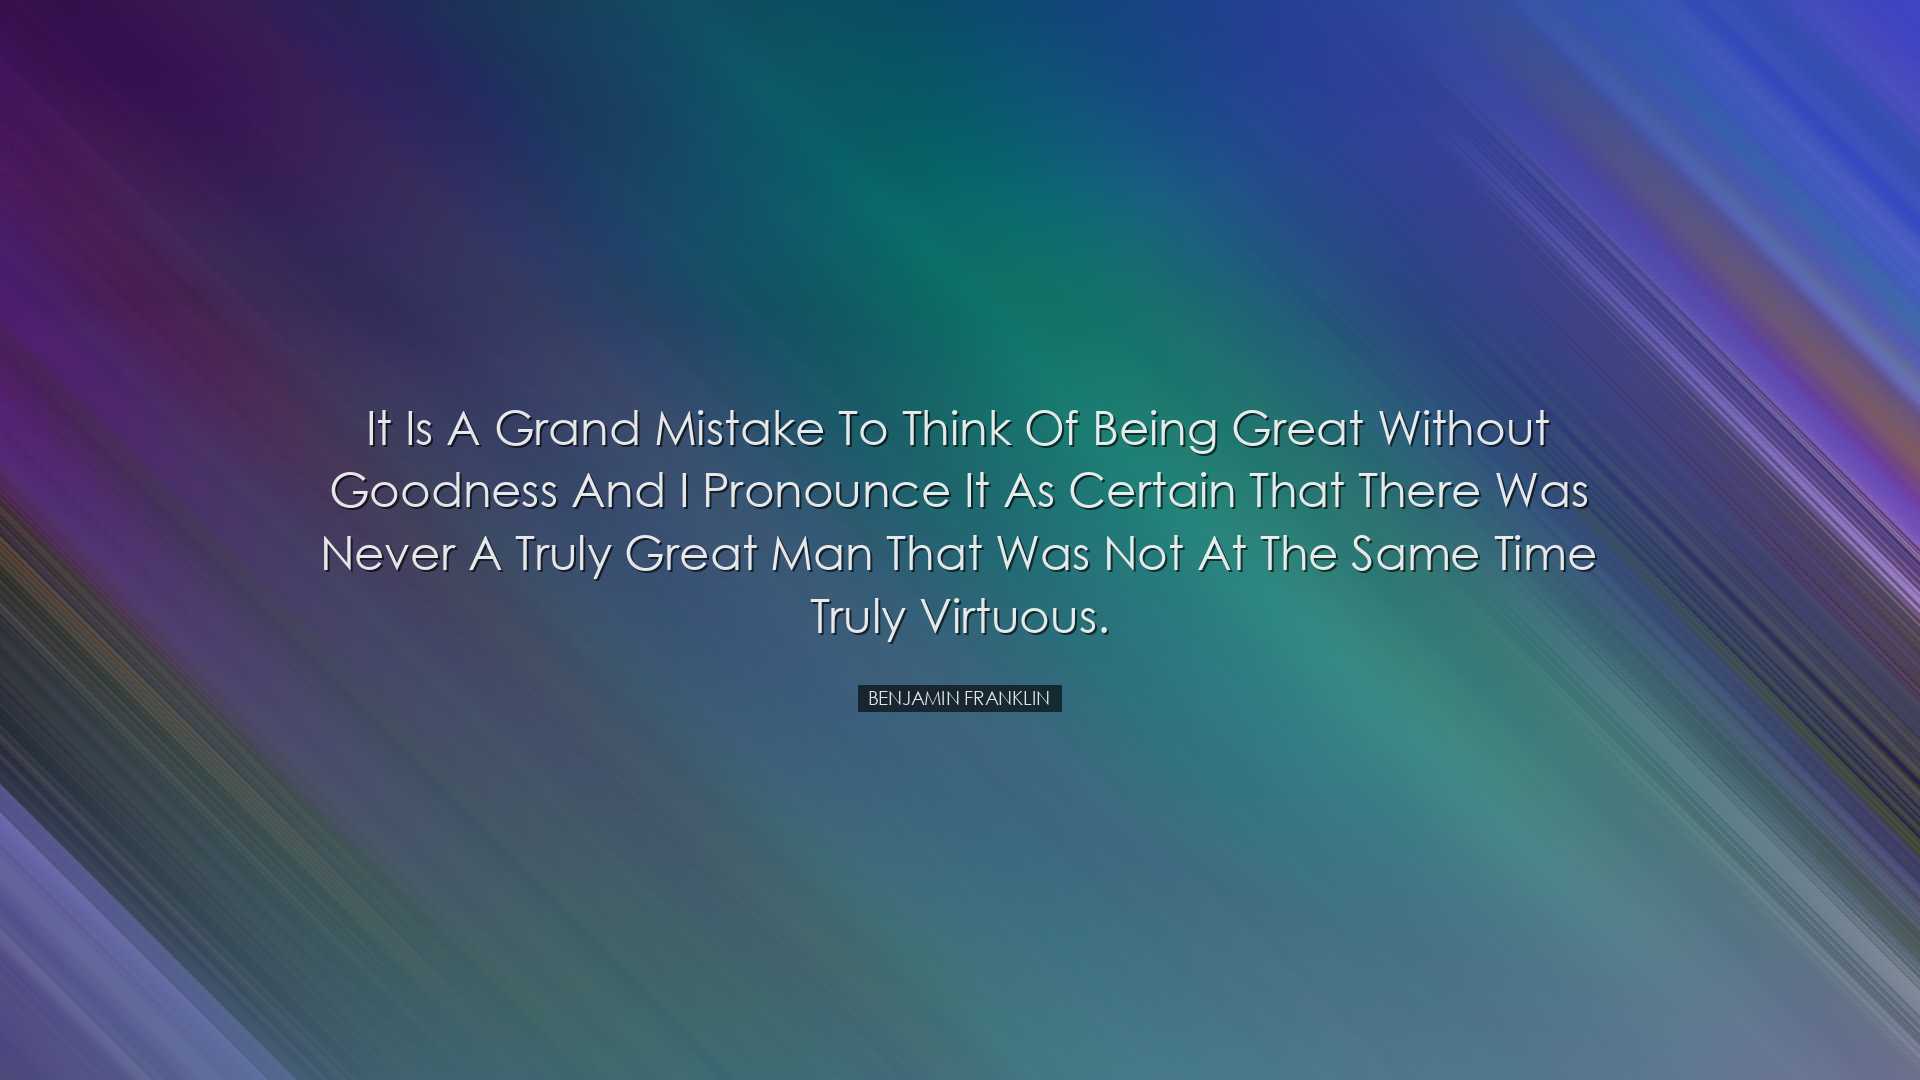 It is a grand mistake to think of being great without goodness and